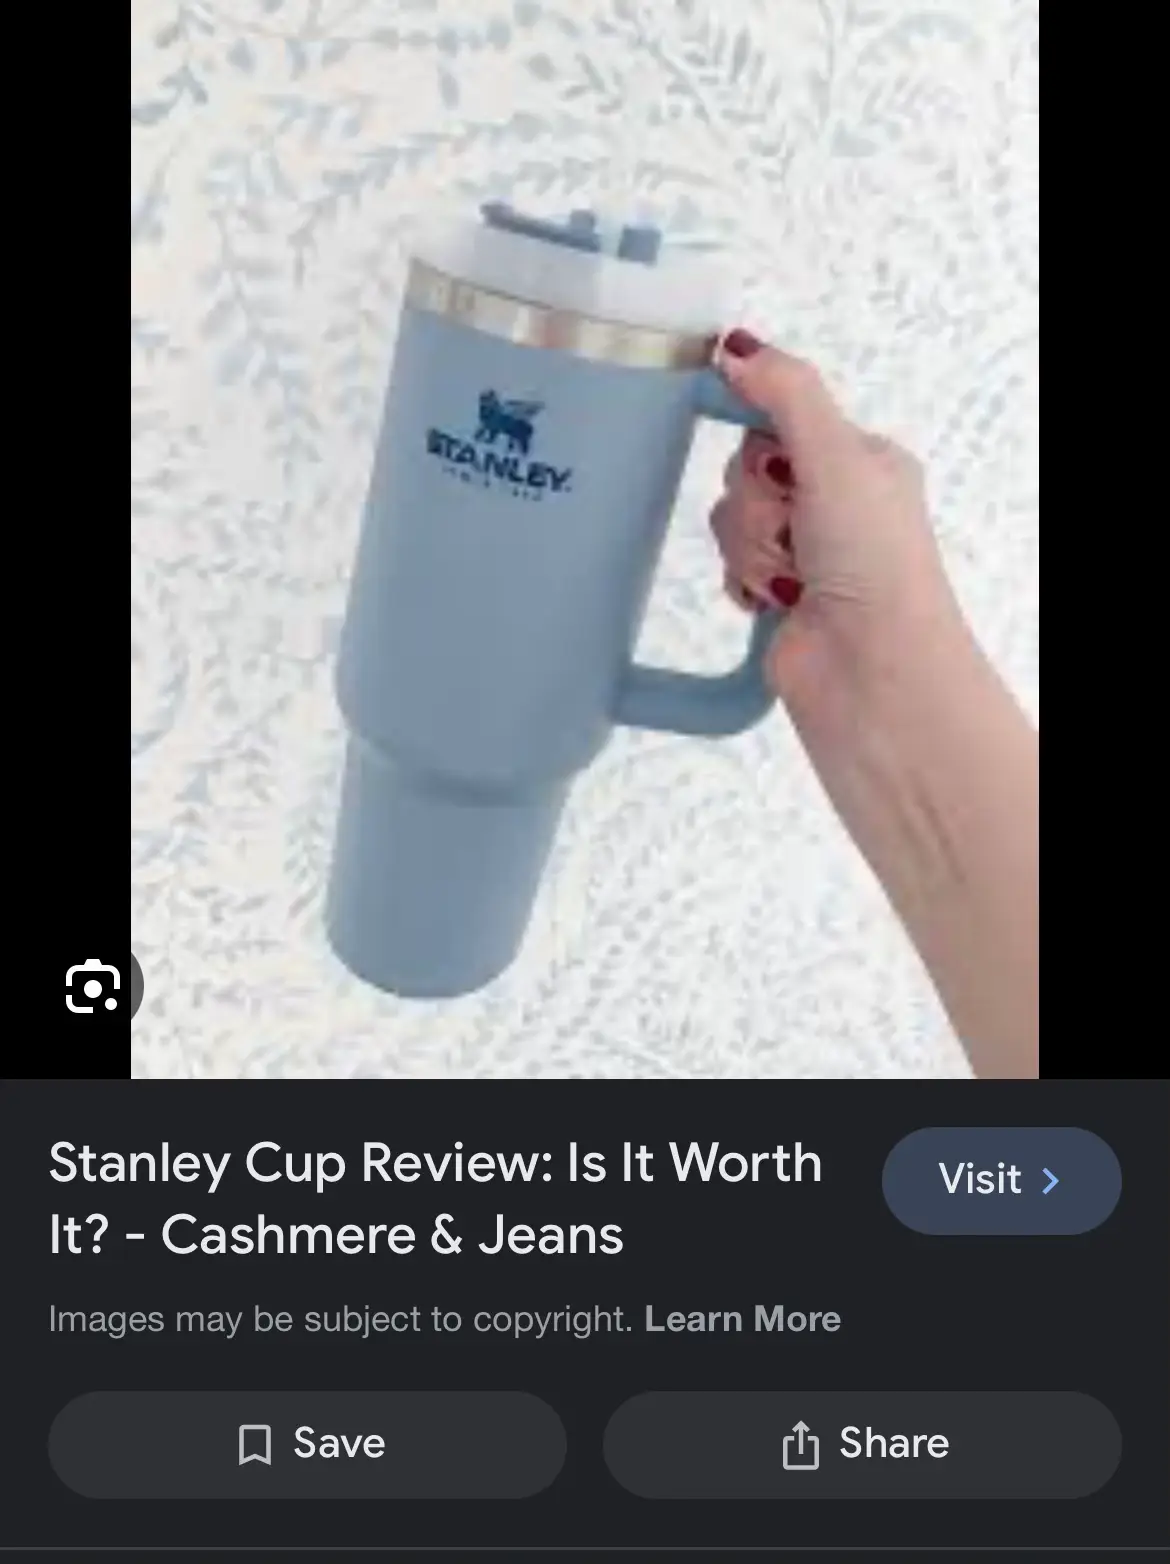 Stanley Cup Review: Is It Worth It? - Cashmere & Jeans